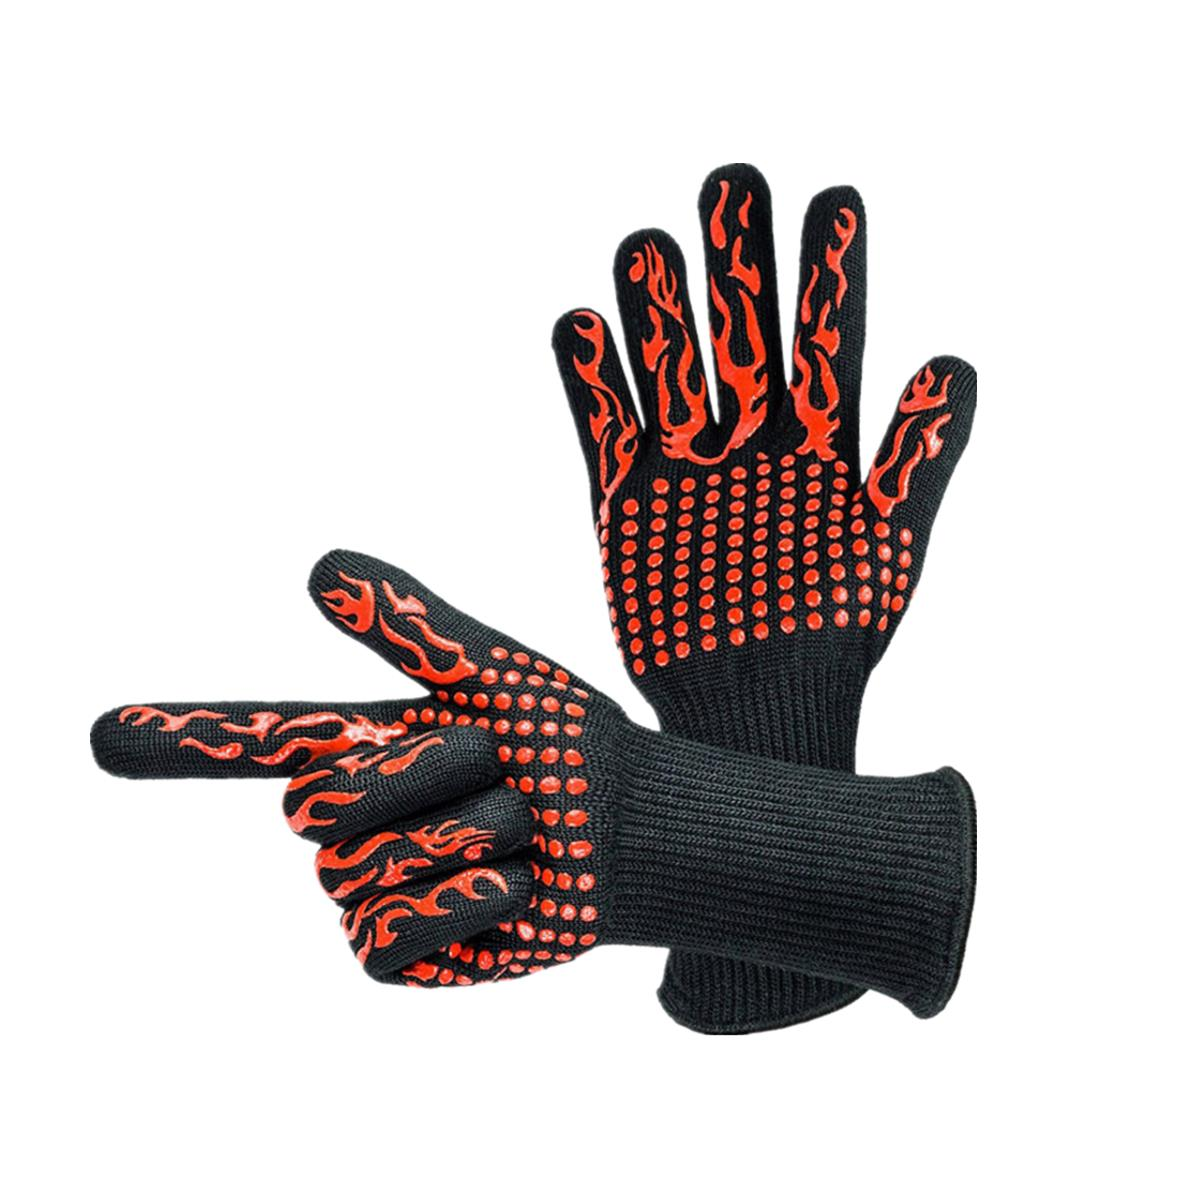 Extreme Heat Resistant Multi-Purpose Grilling Cook Kitchen BBQ Baking Glove New